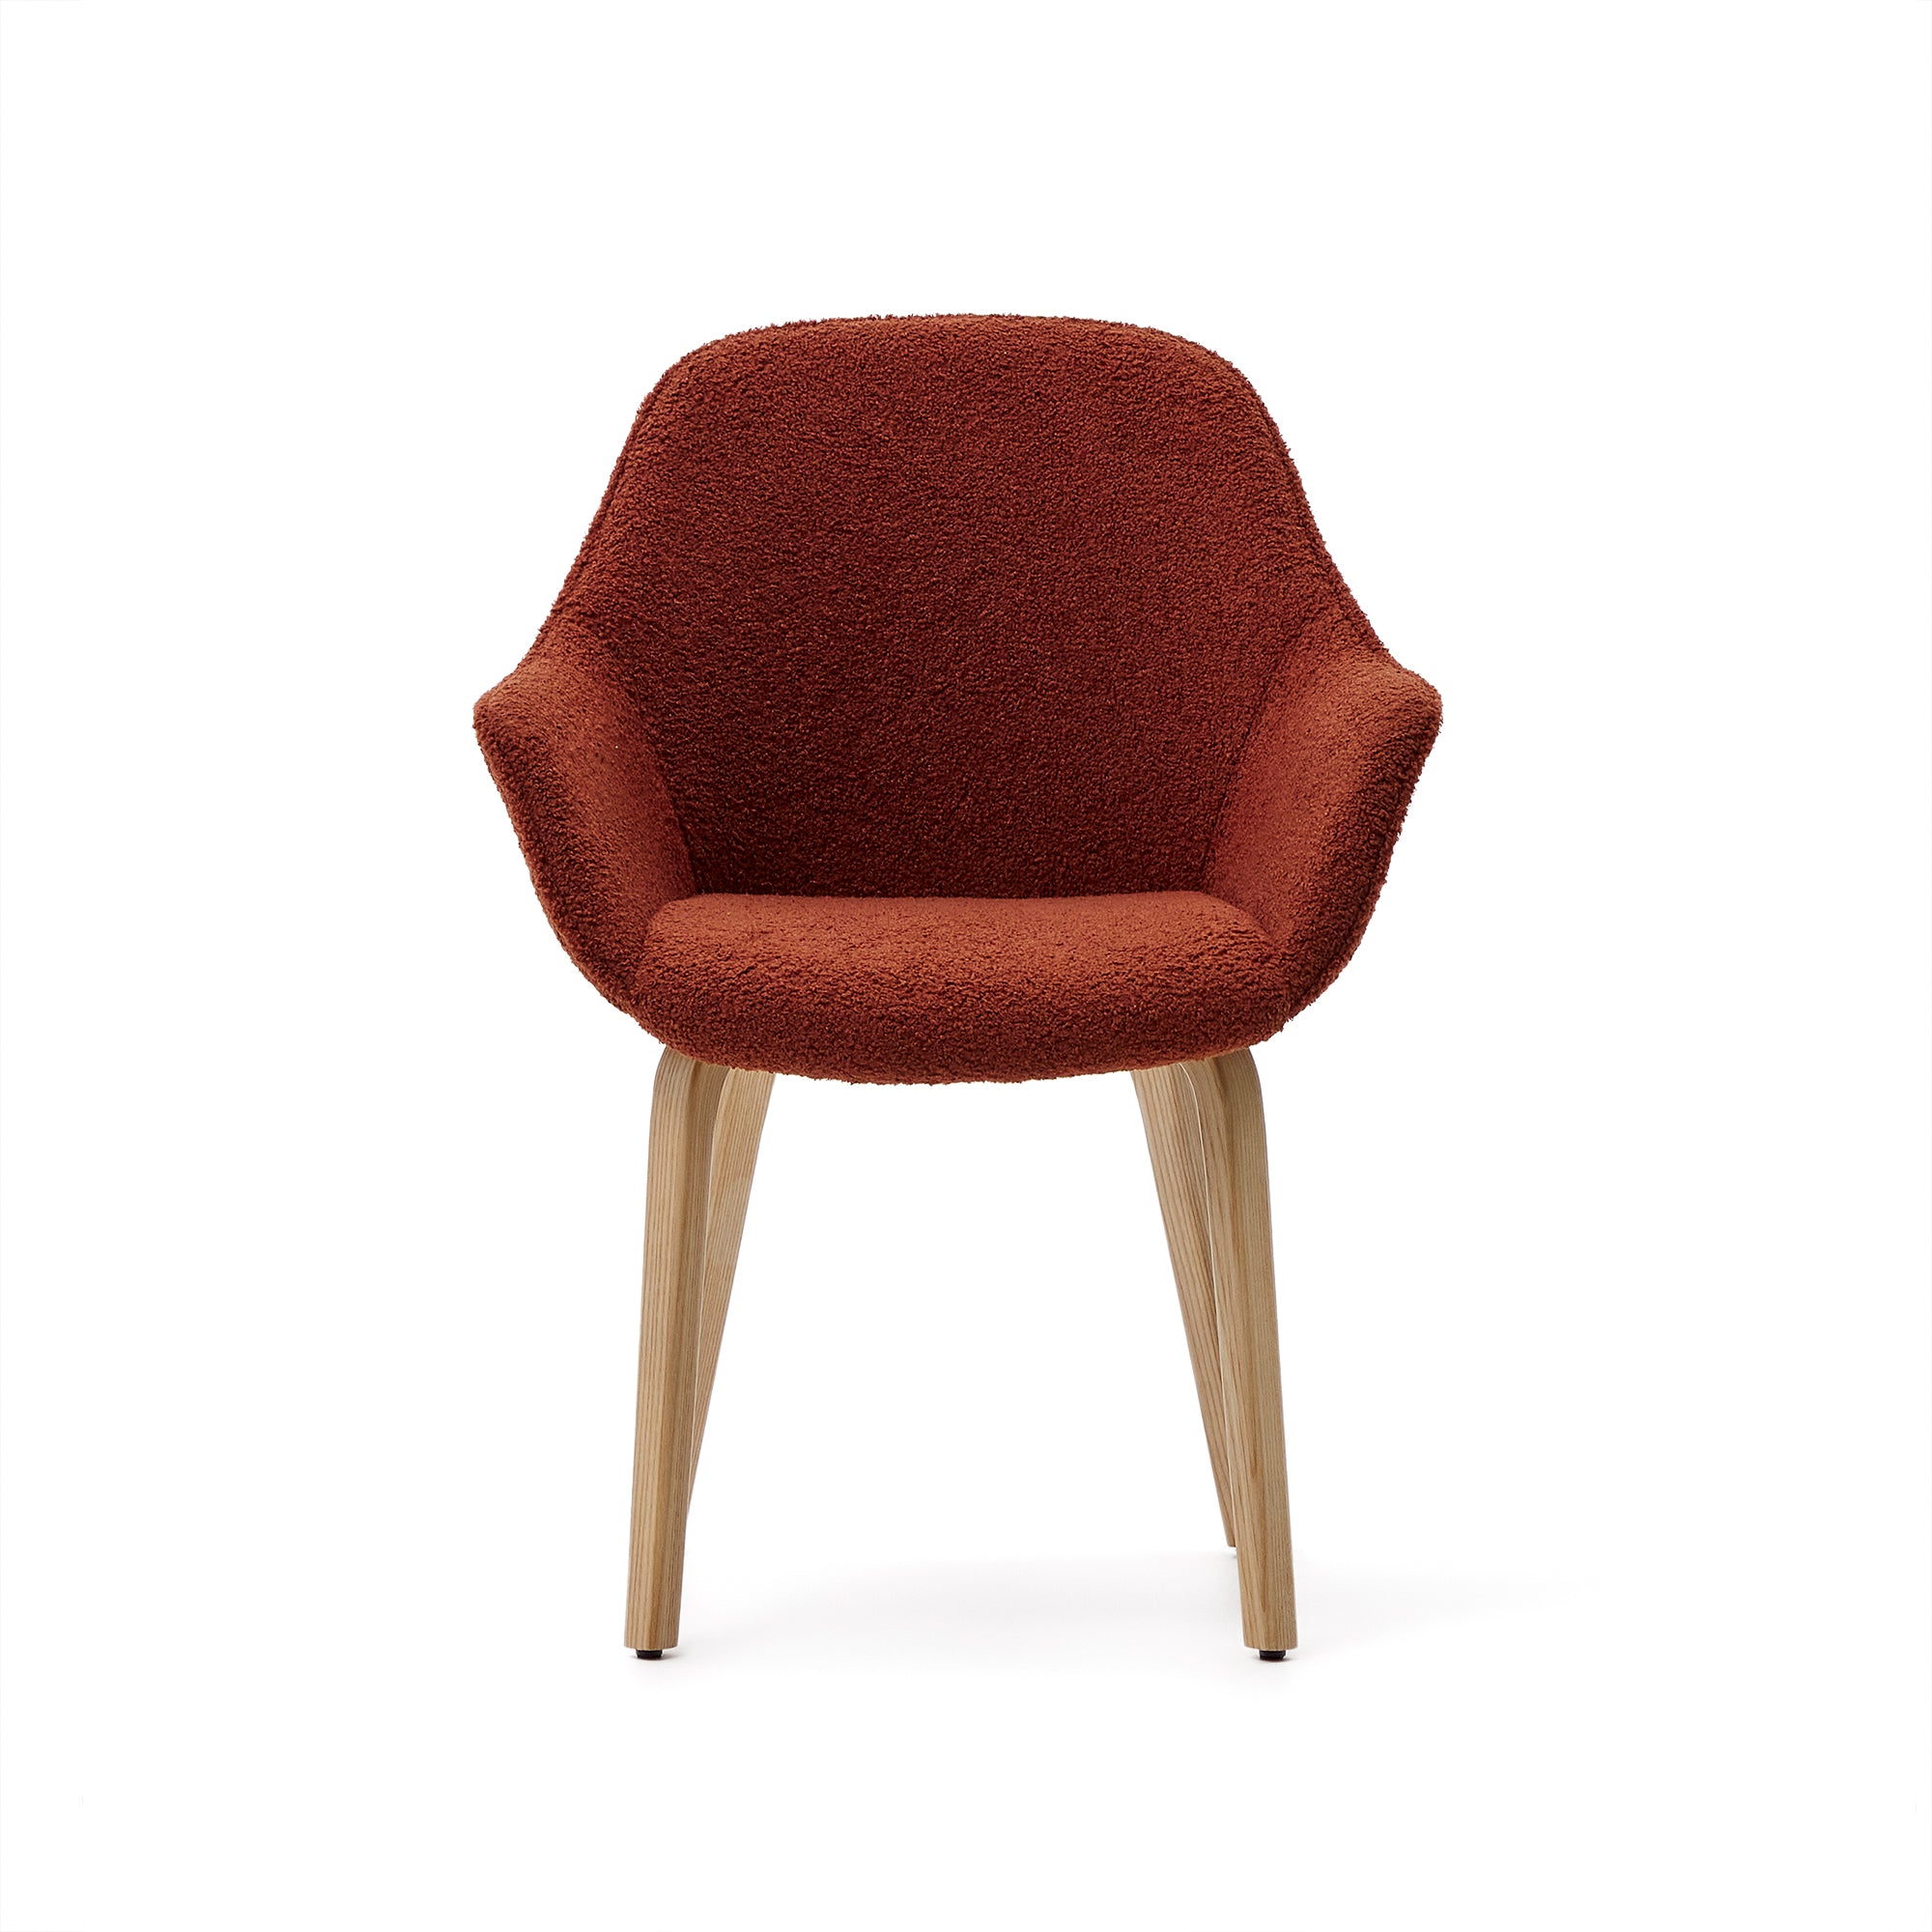 Aleli chair in terracota shearling with solid ash wood legs and natural finish